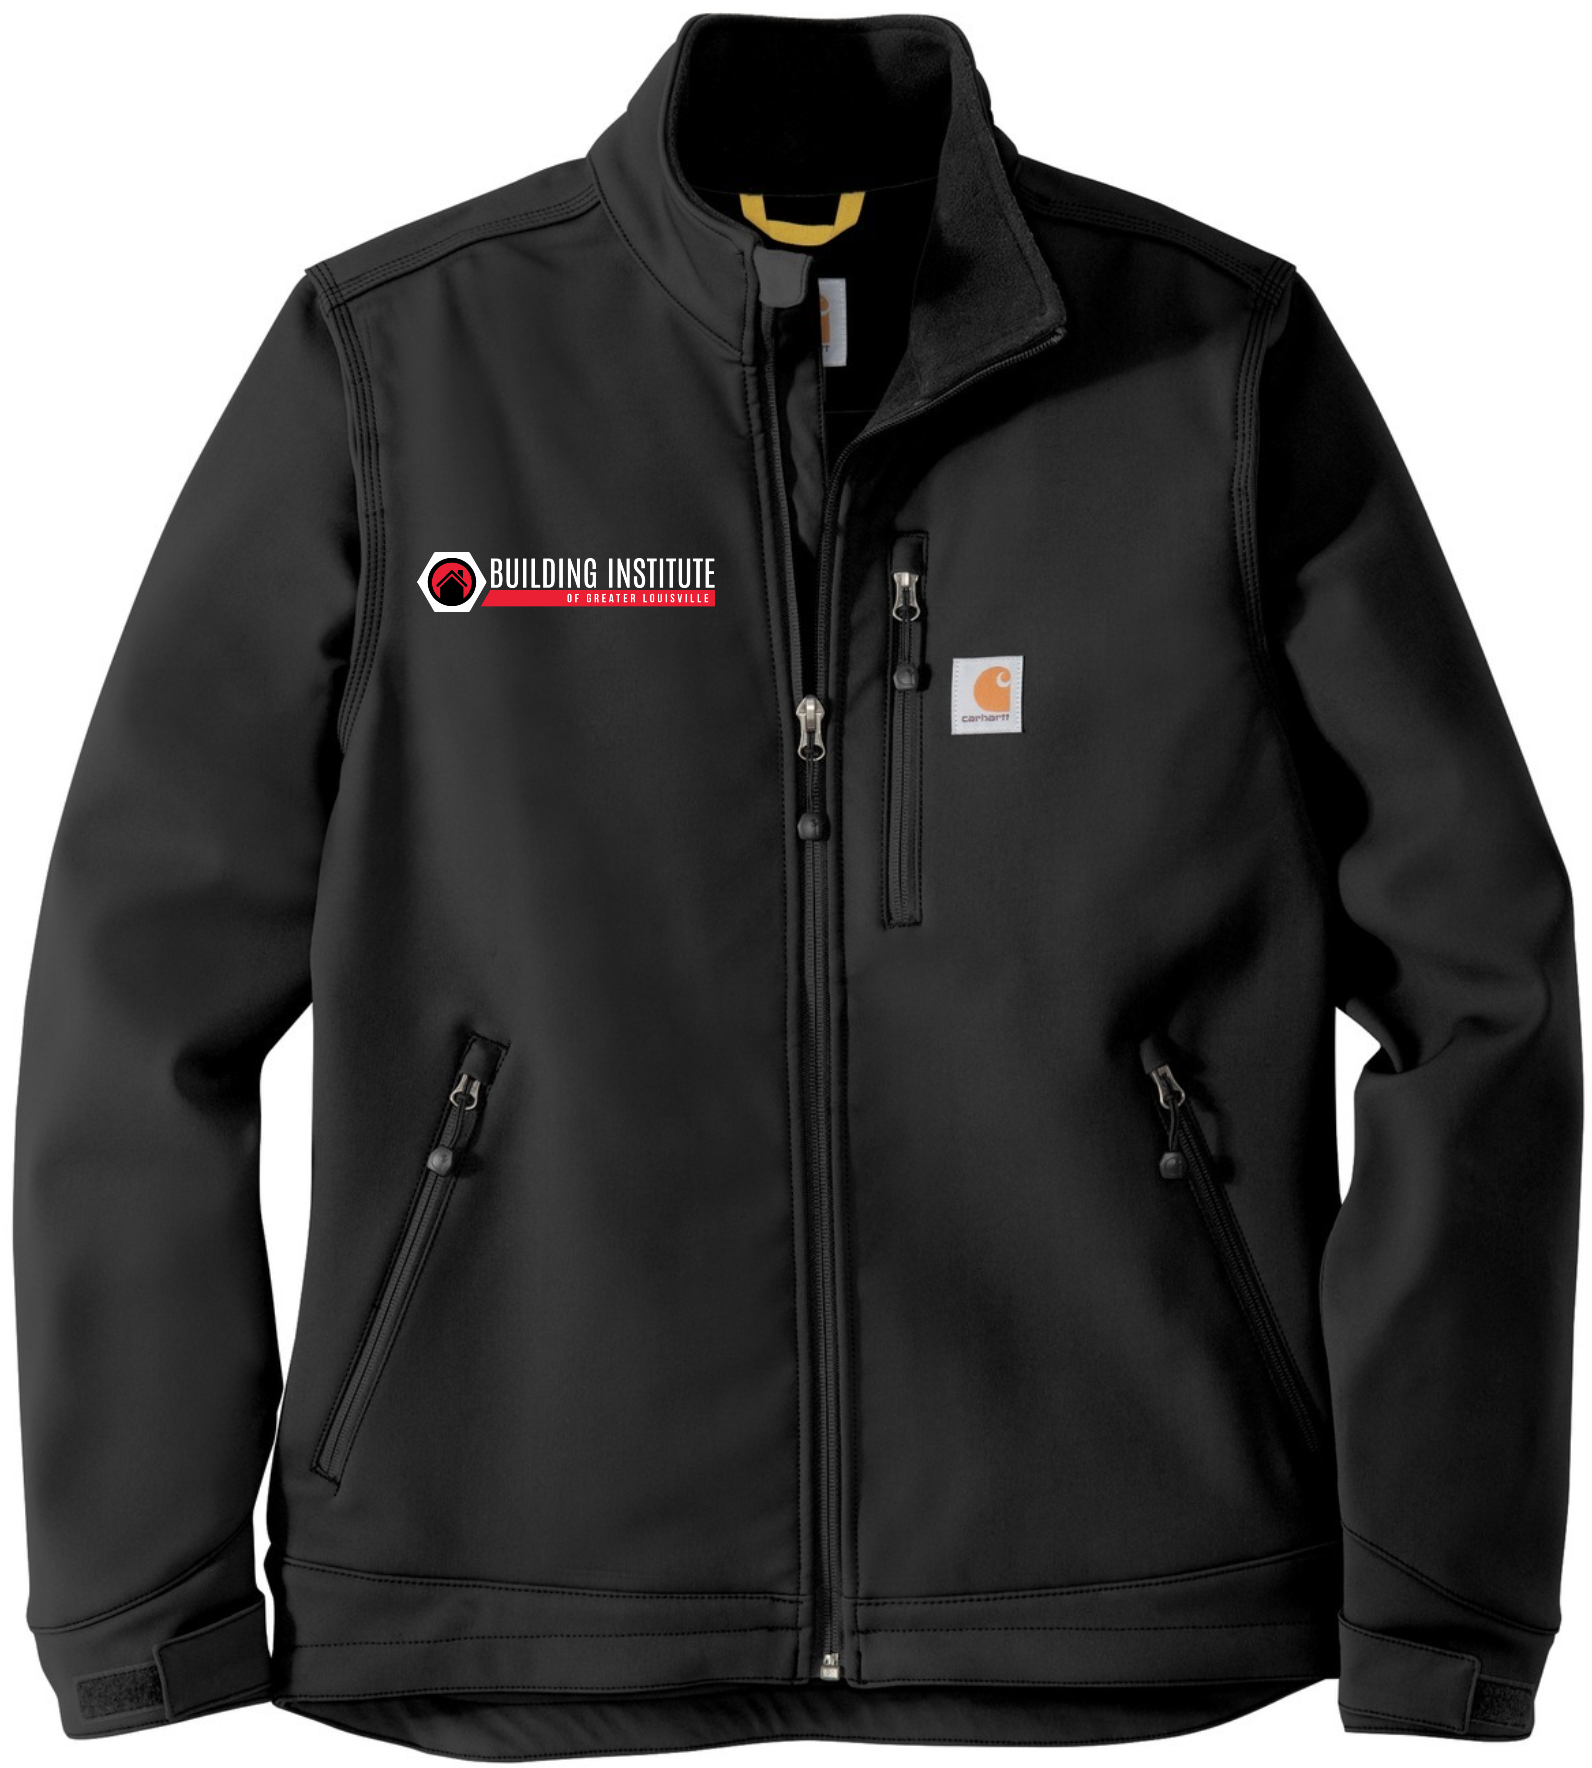 Building Institute – Carhartt ® Crowley Soft Shell Jacket - CT102199 (White Logo)